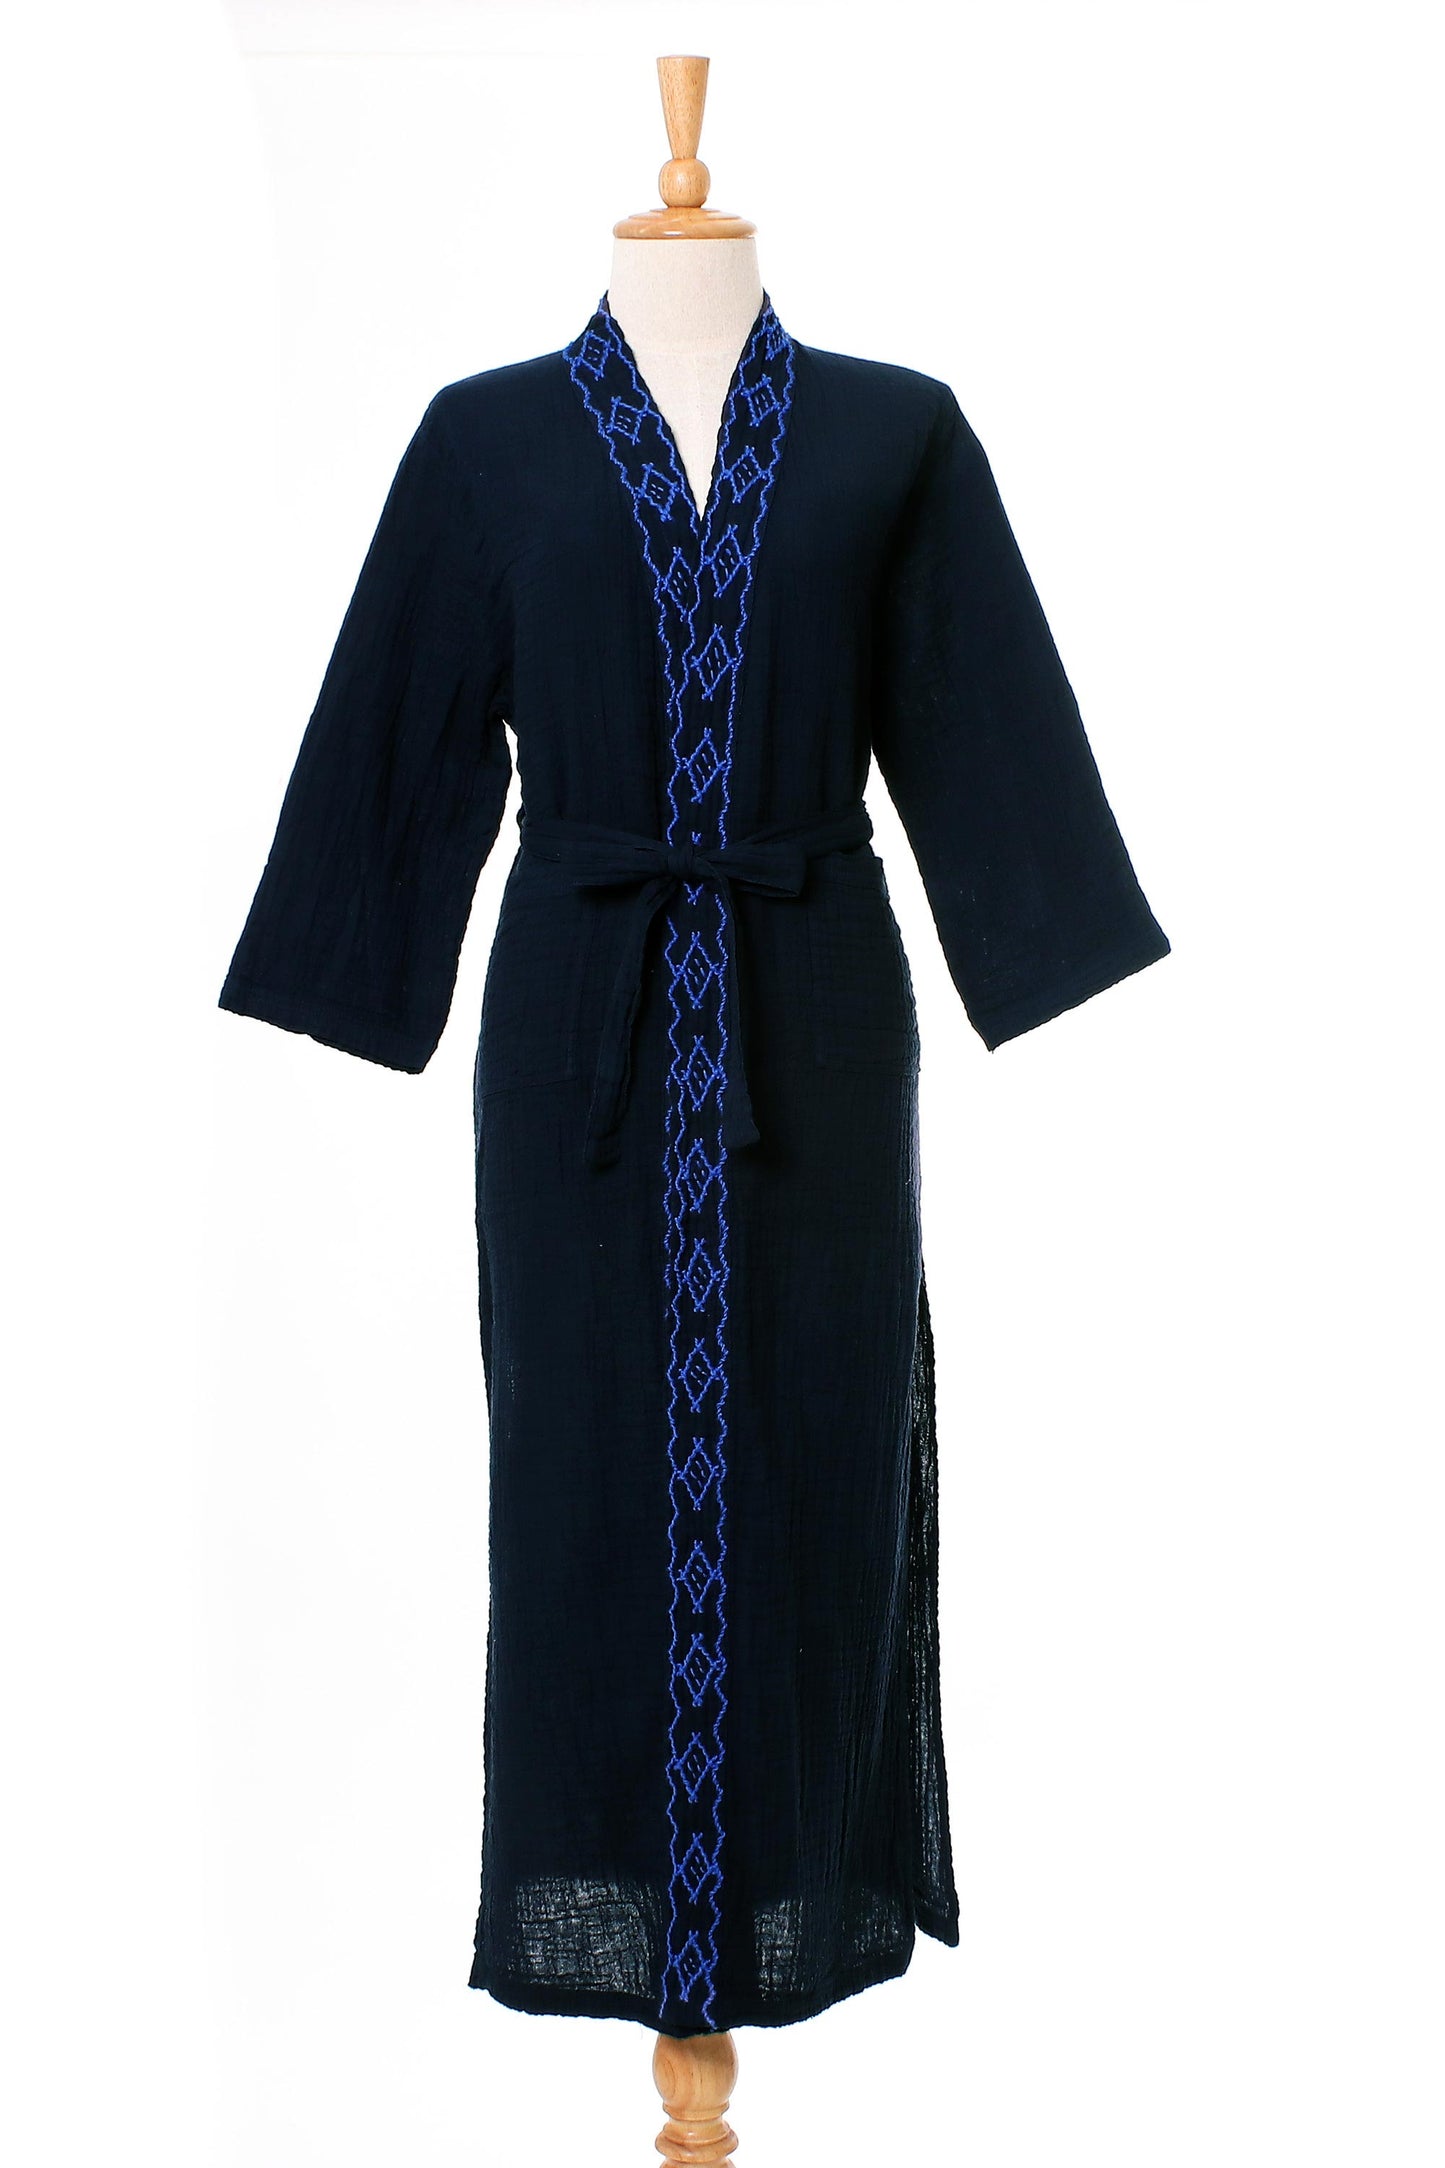 Midnight Relaxation Diamond Embroidered Cotton Robe in Midnight from Thailand